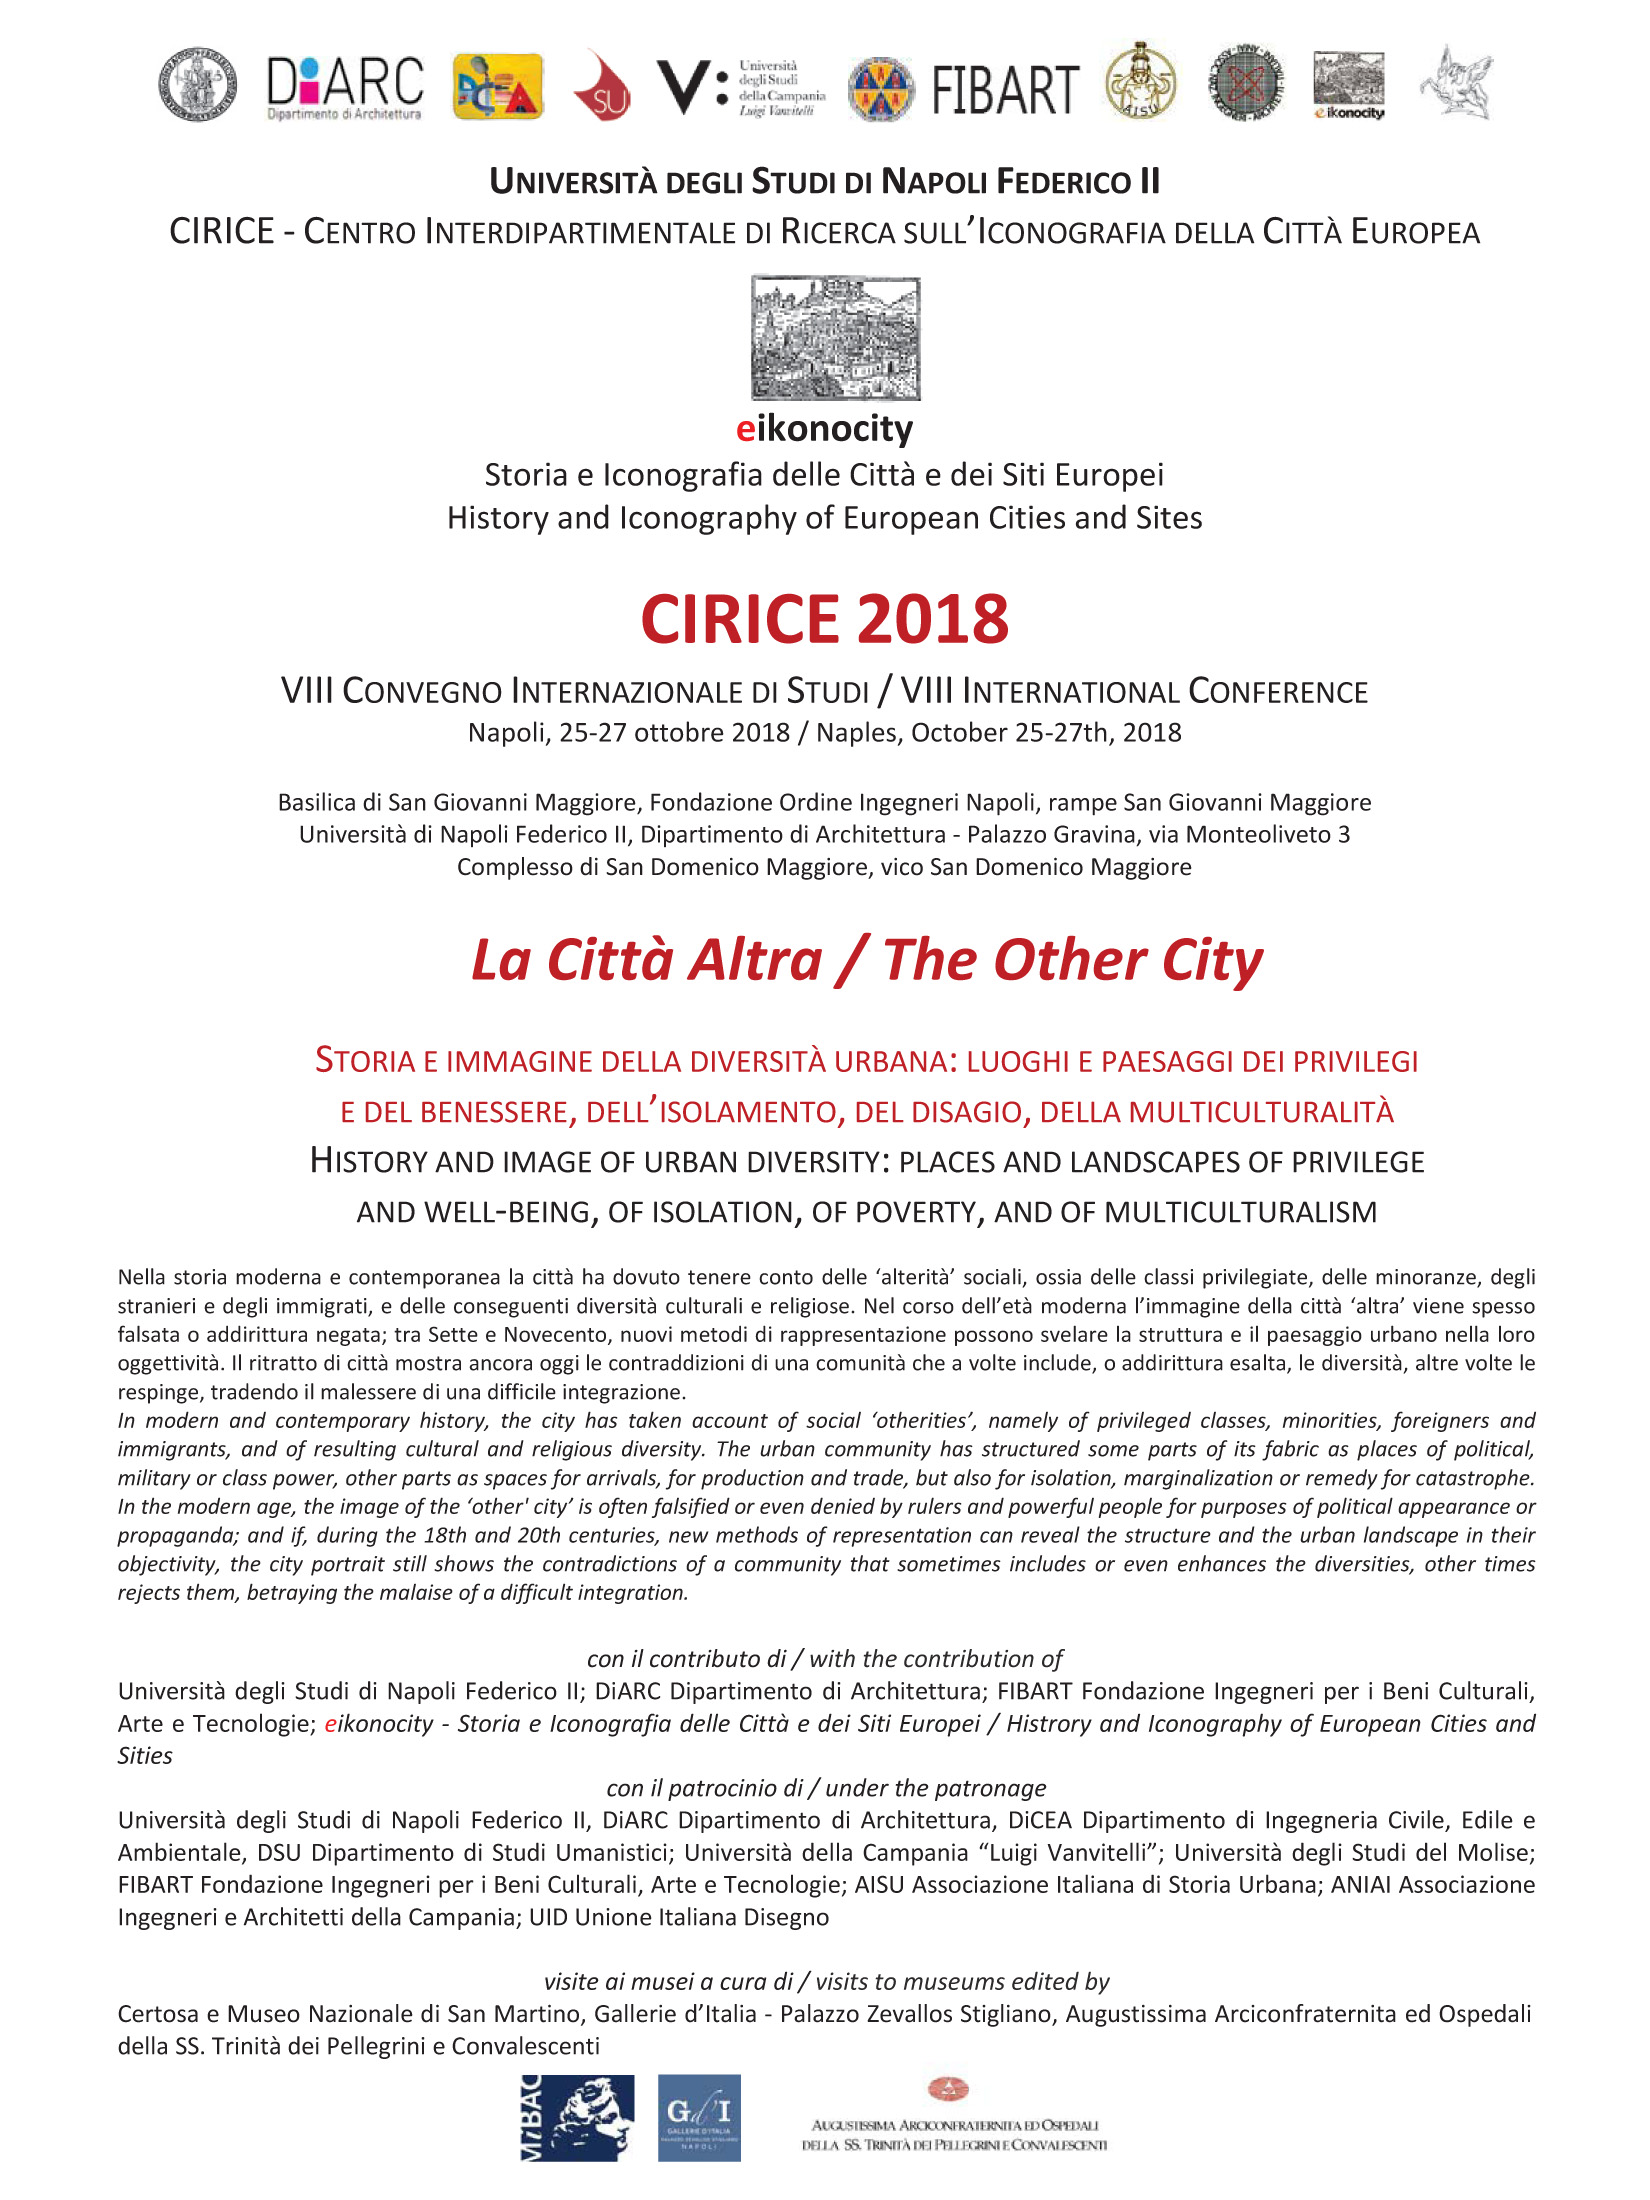 8th International Conference CIRICE: The Other City. History and image of urban diversity